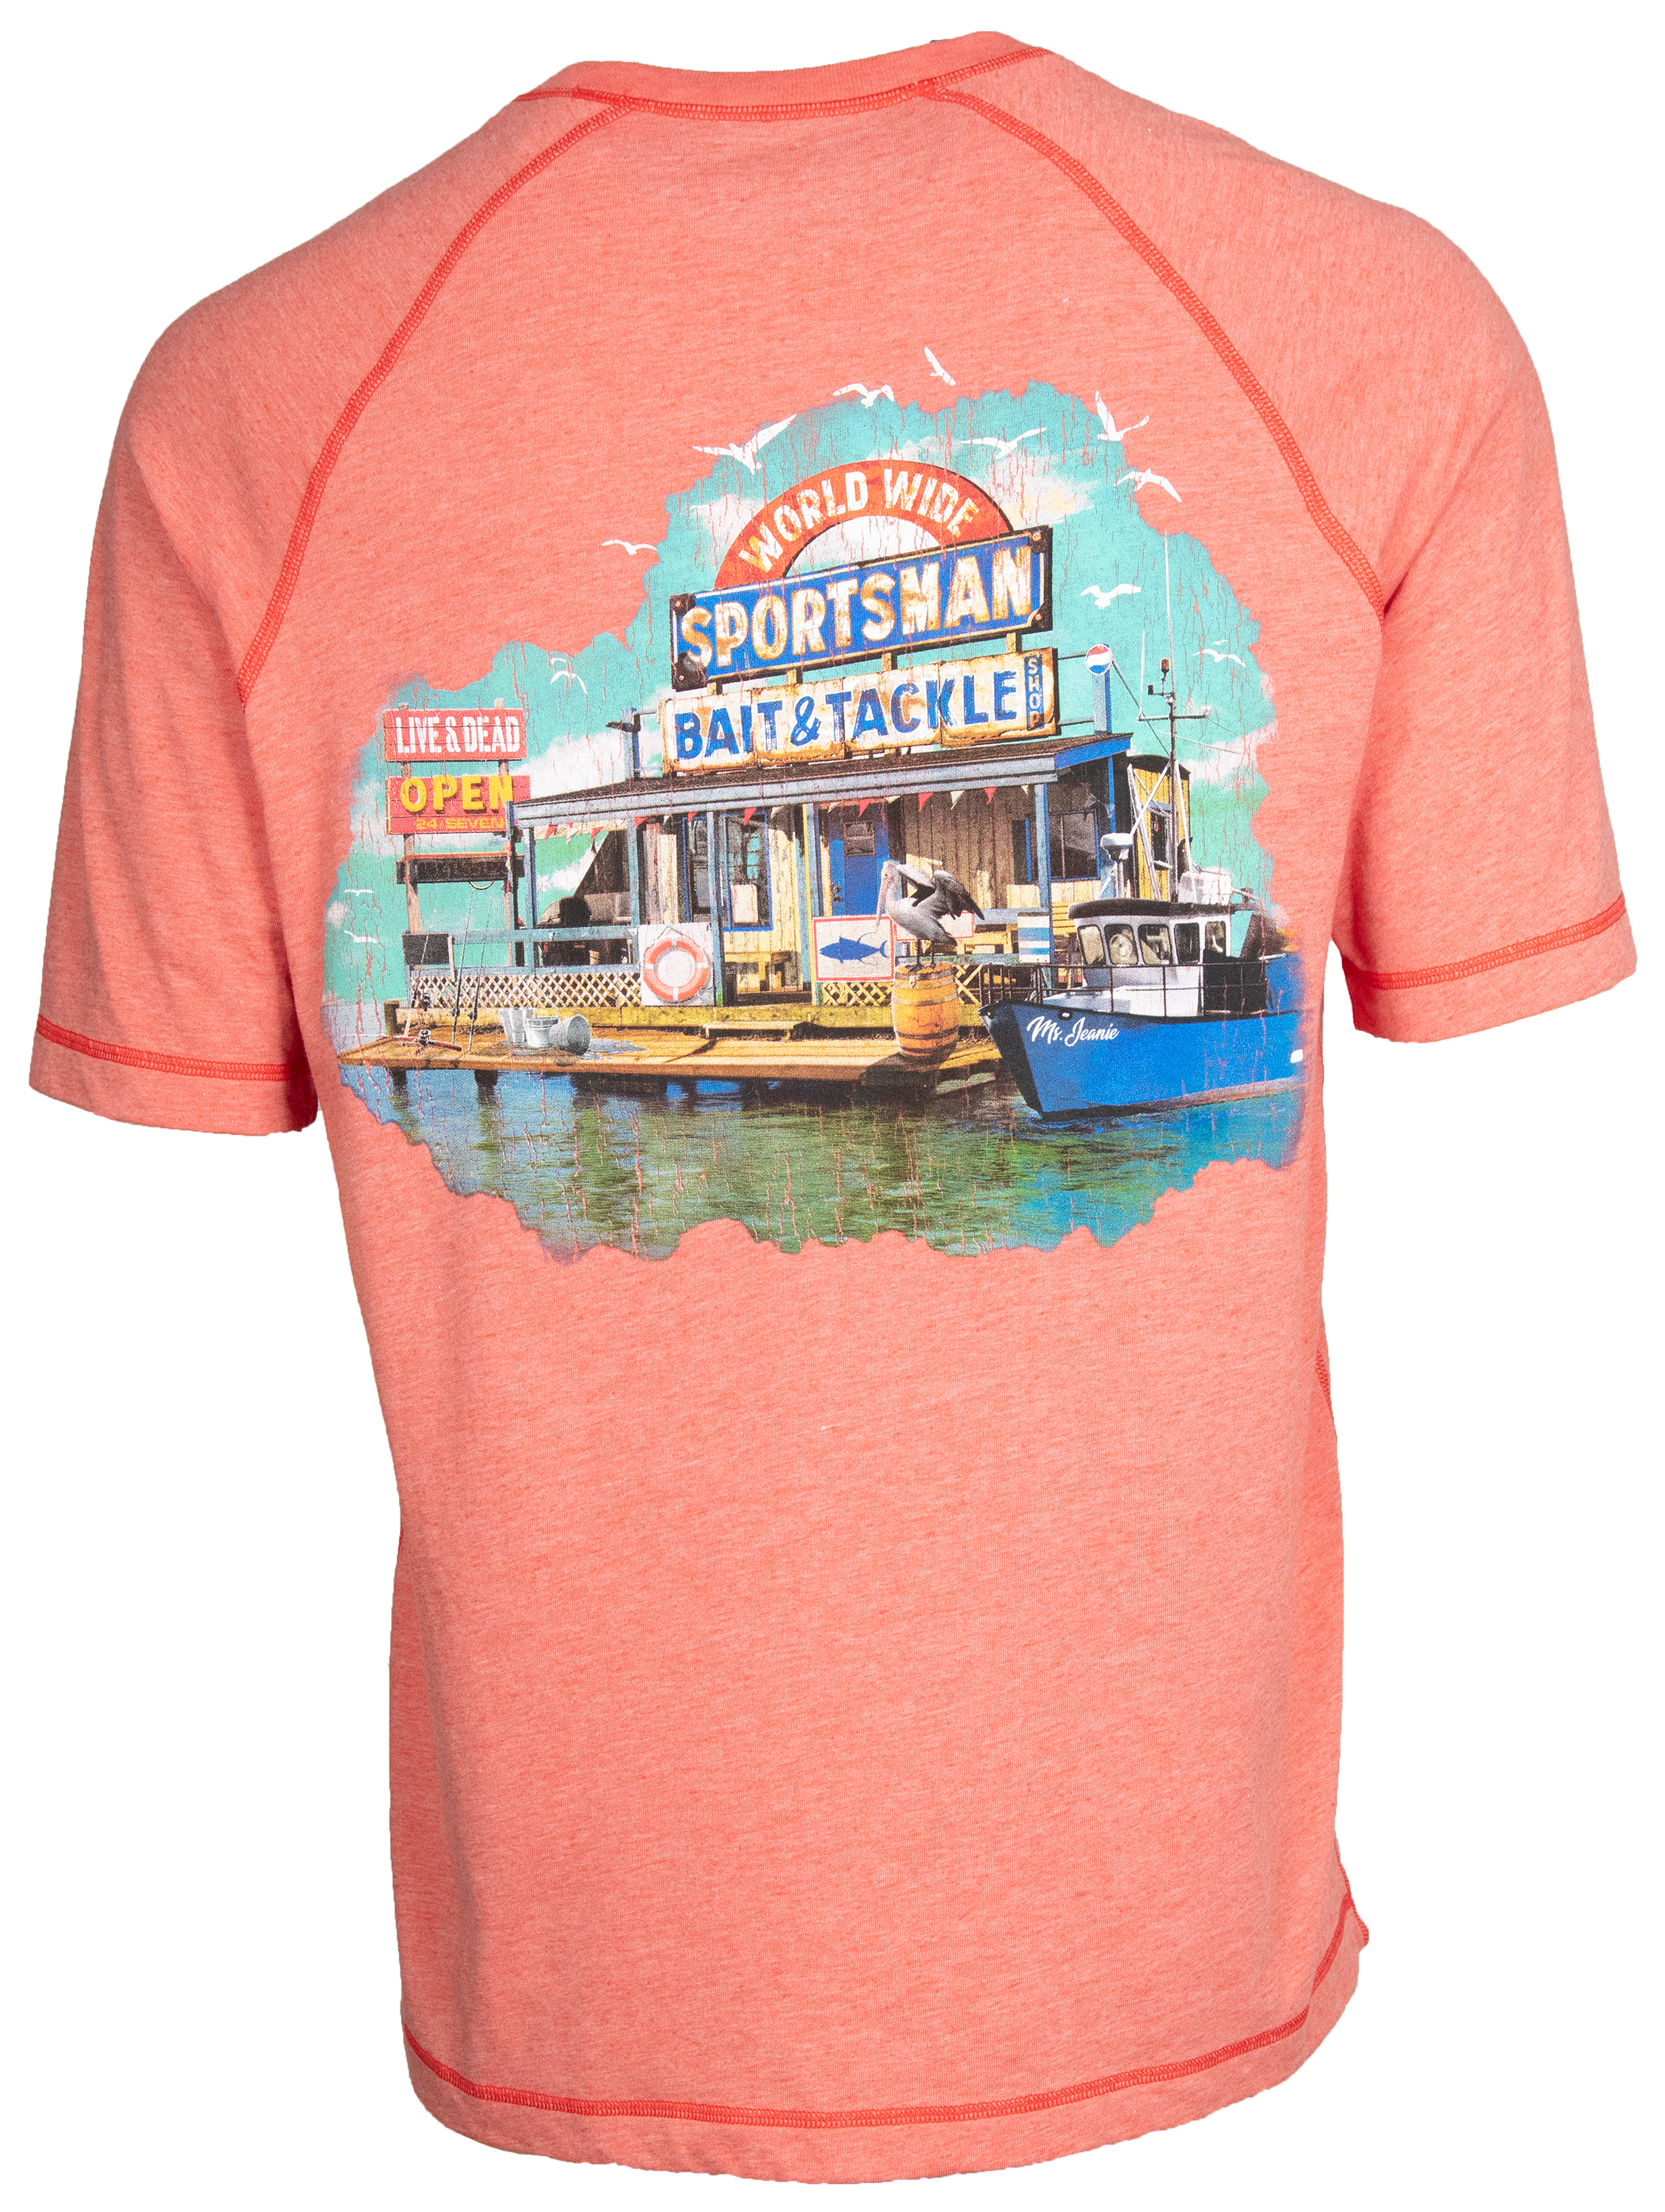 World Wide Sportsman Tackle Shop Graphic Short-Sleeve T-Shirt for Men - Coral - XL